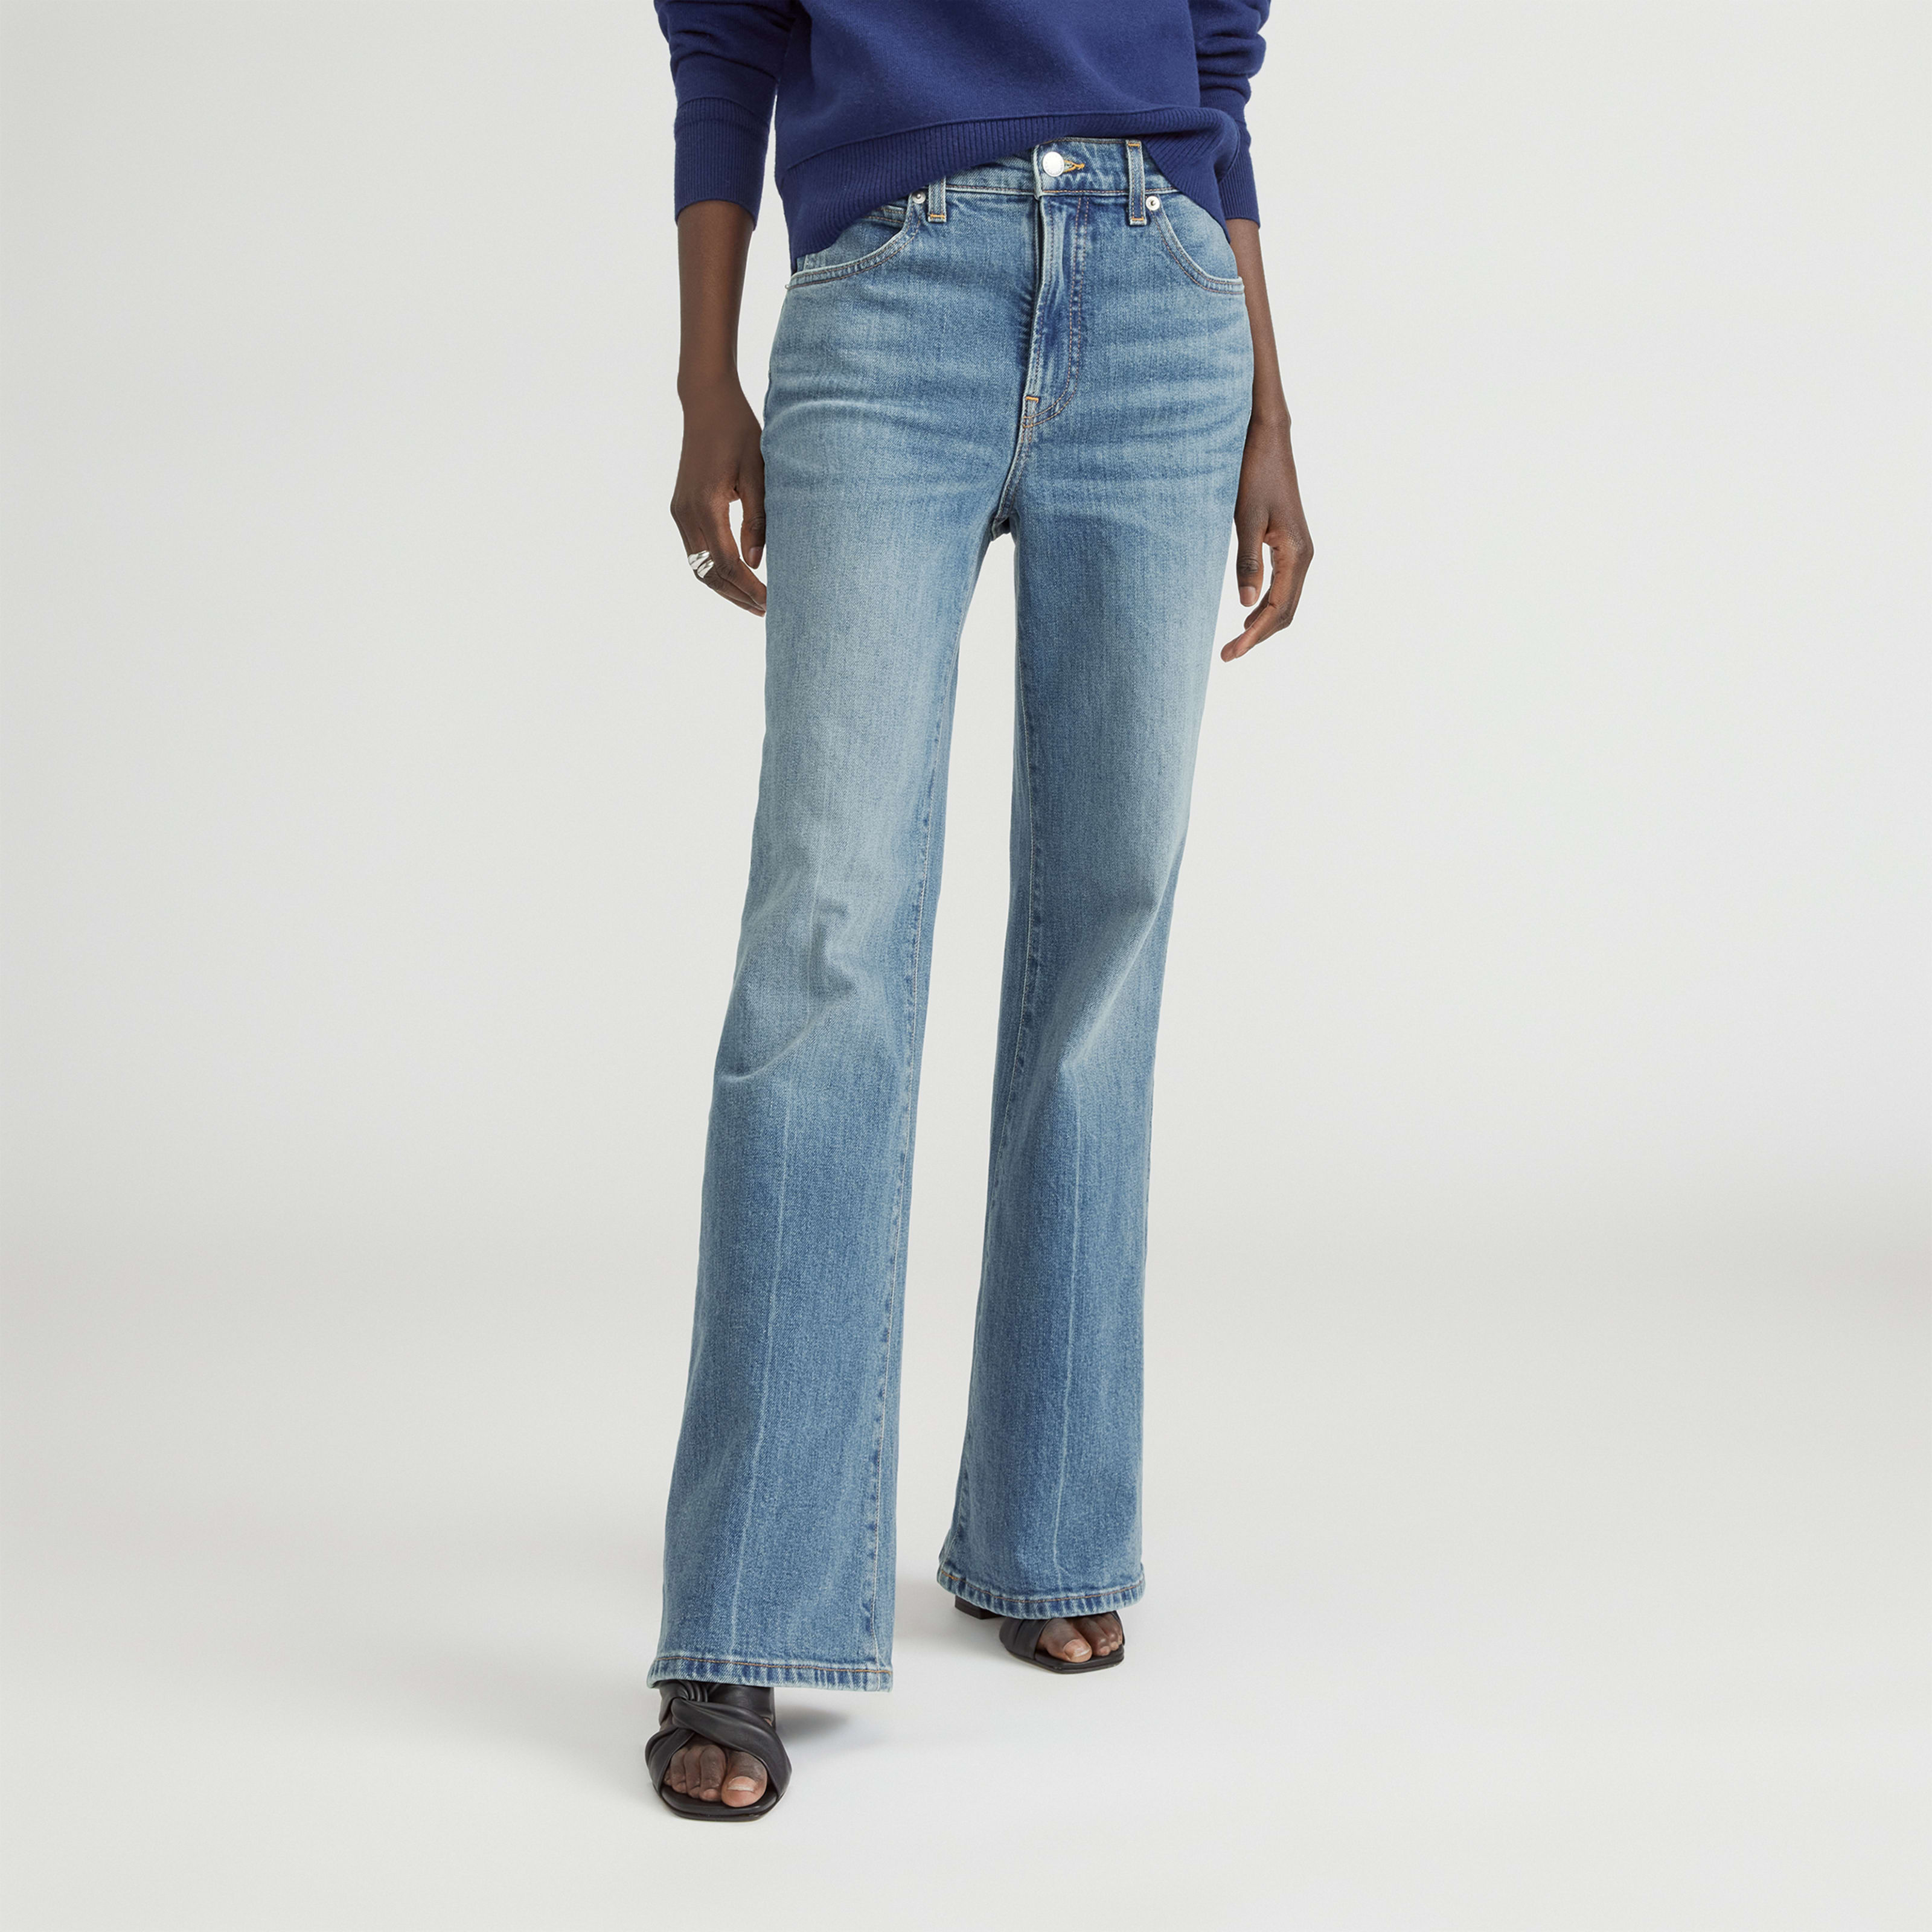 women's high-rise flare jean by everlane in bright indigo, size 23